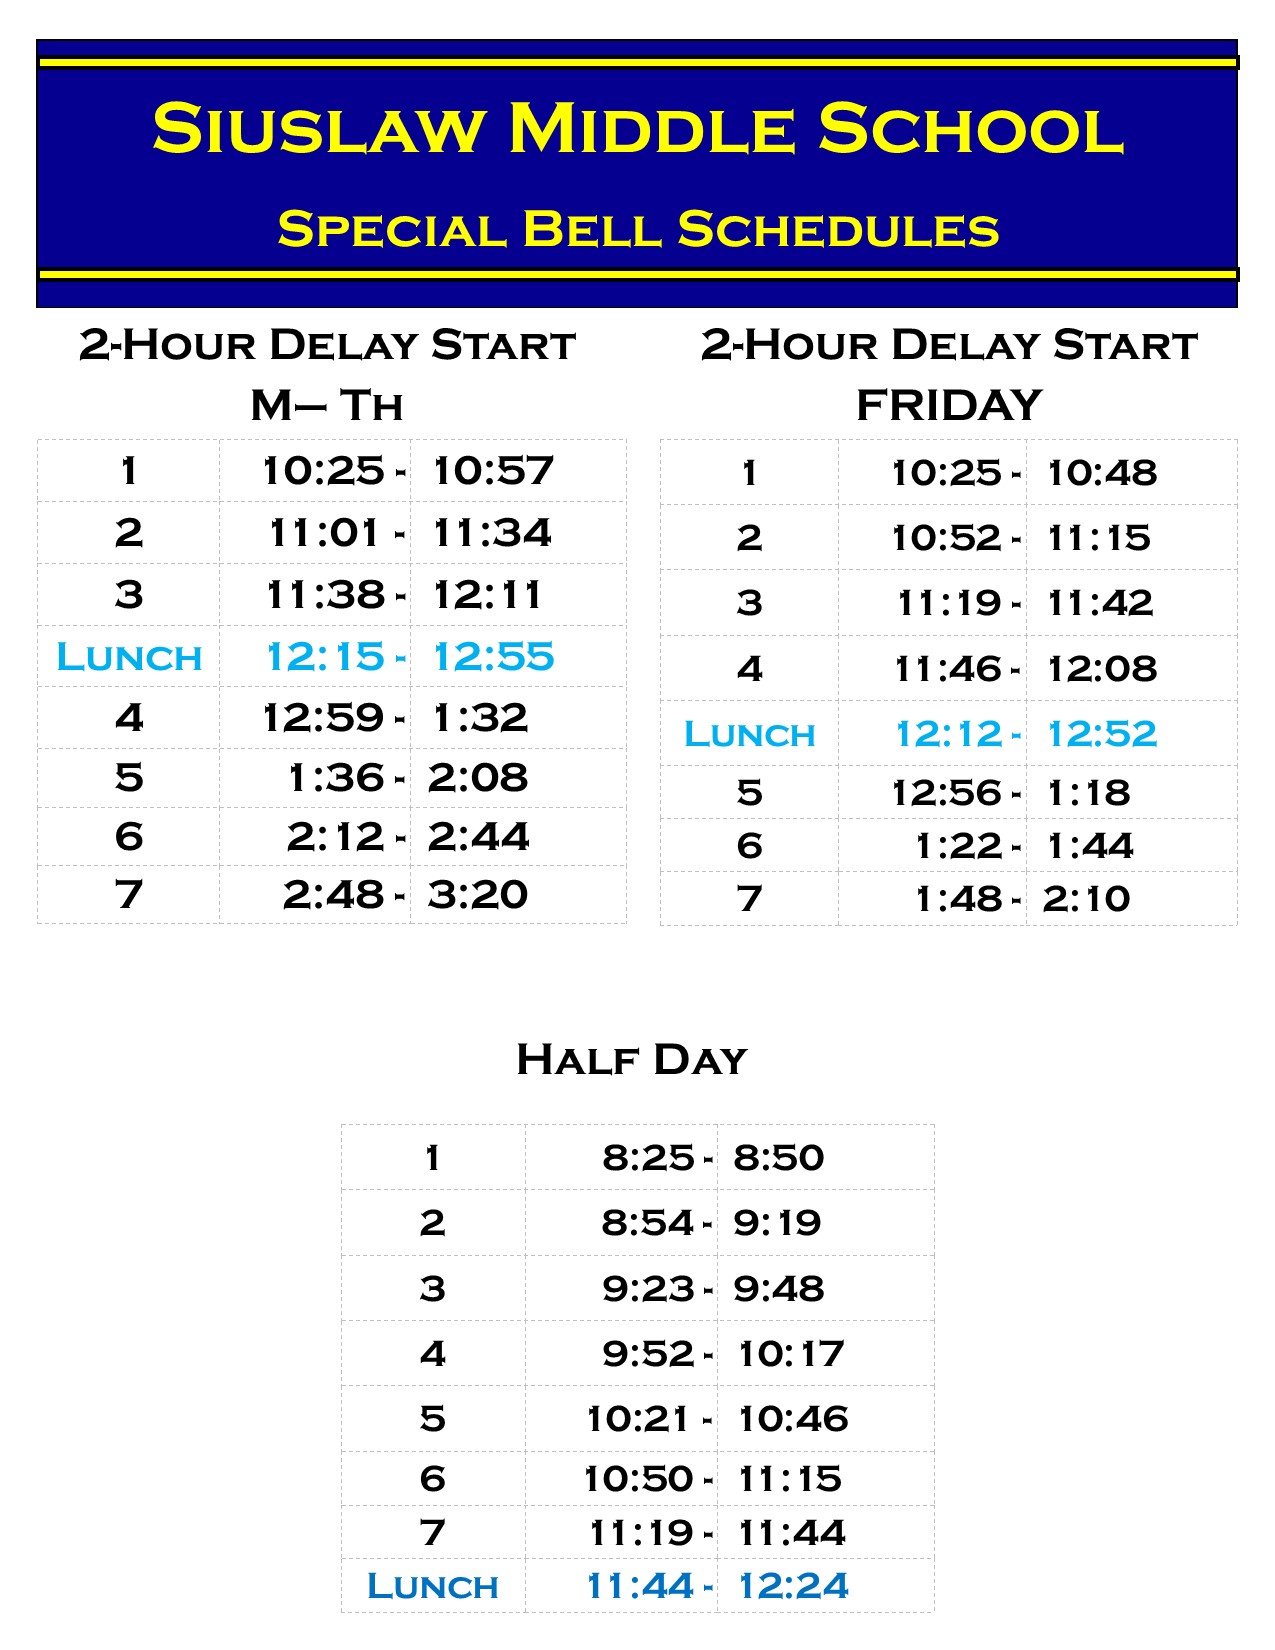 Special Bell Schedules